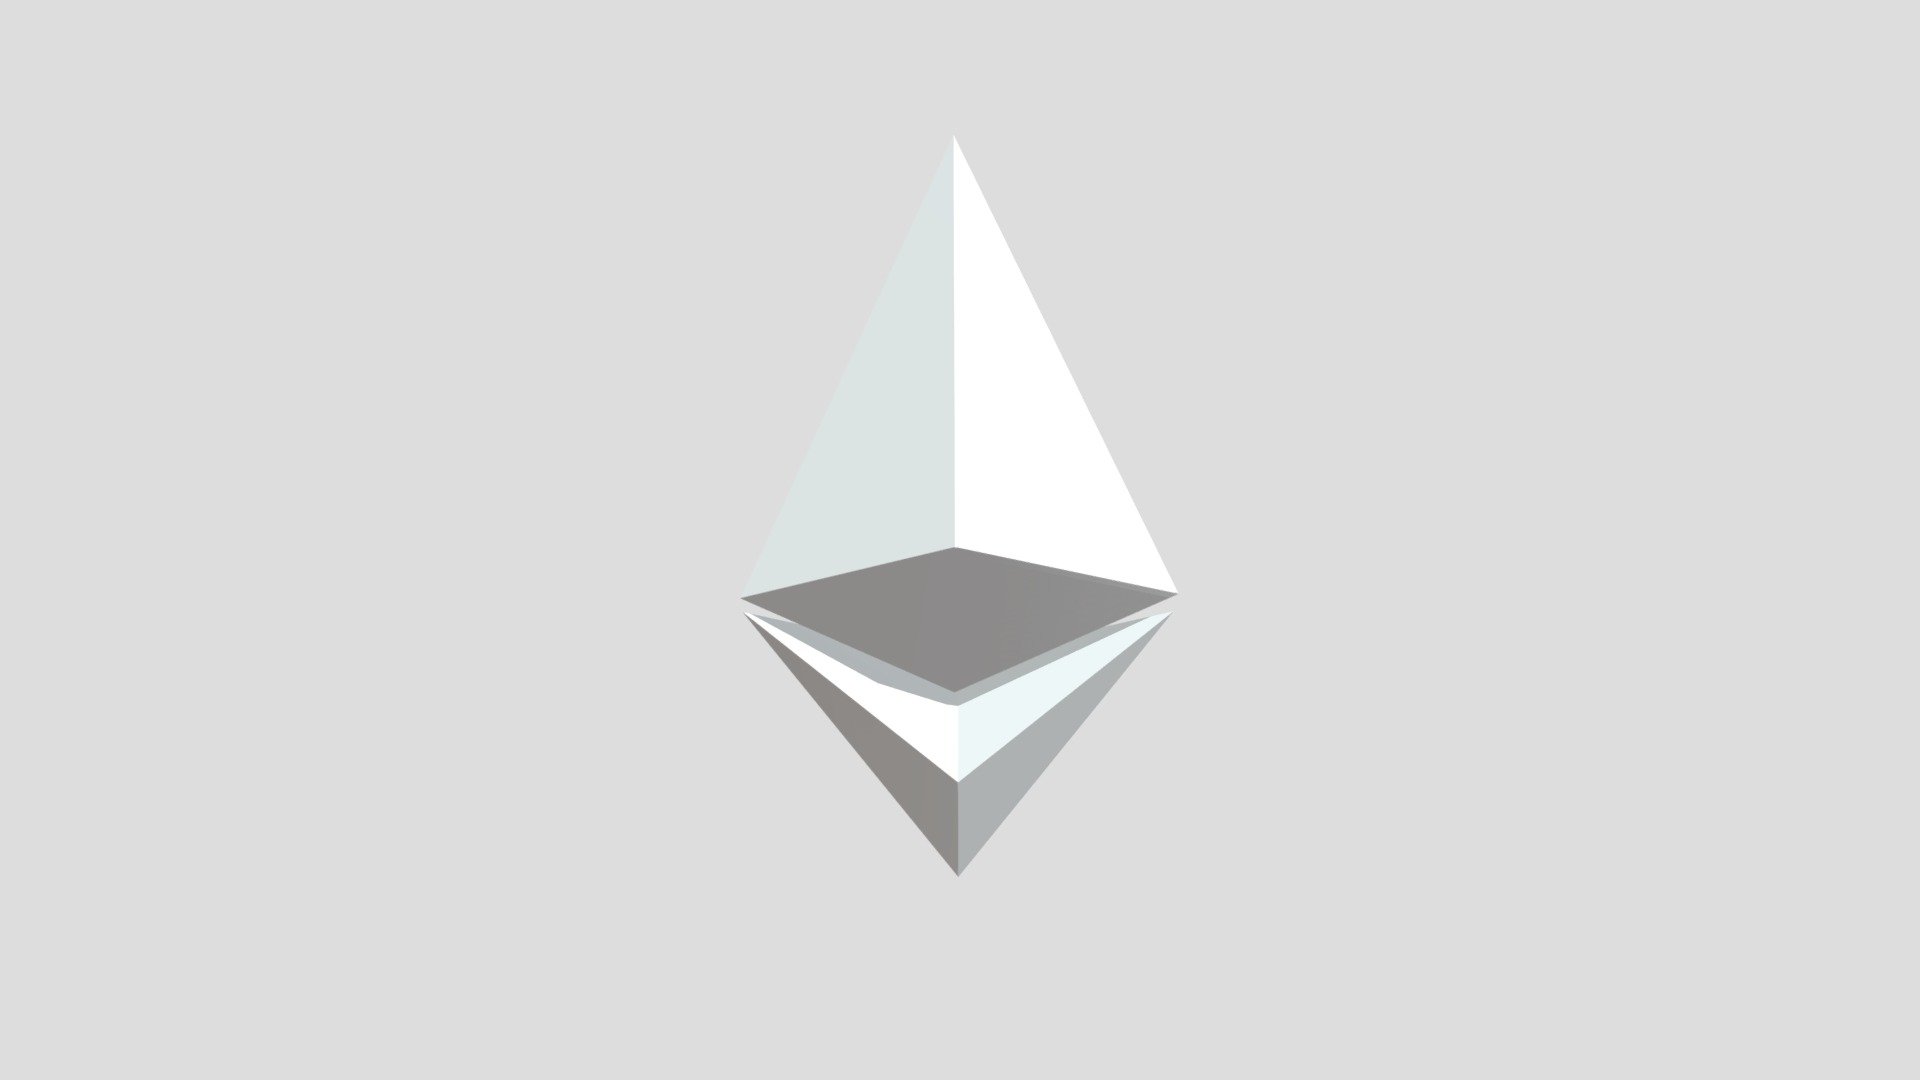 Base Eth Model animated 90 frames
Simple texture in Arnold
Instagram : https://www.instagram.com/zzyeo/ - Ethereum Coin - Download Free 3D model by zzyeo 3d model